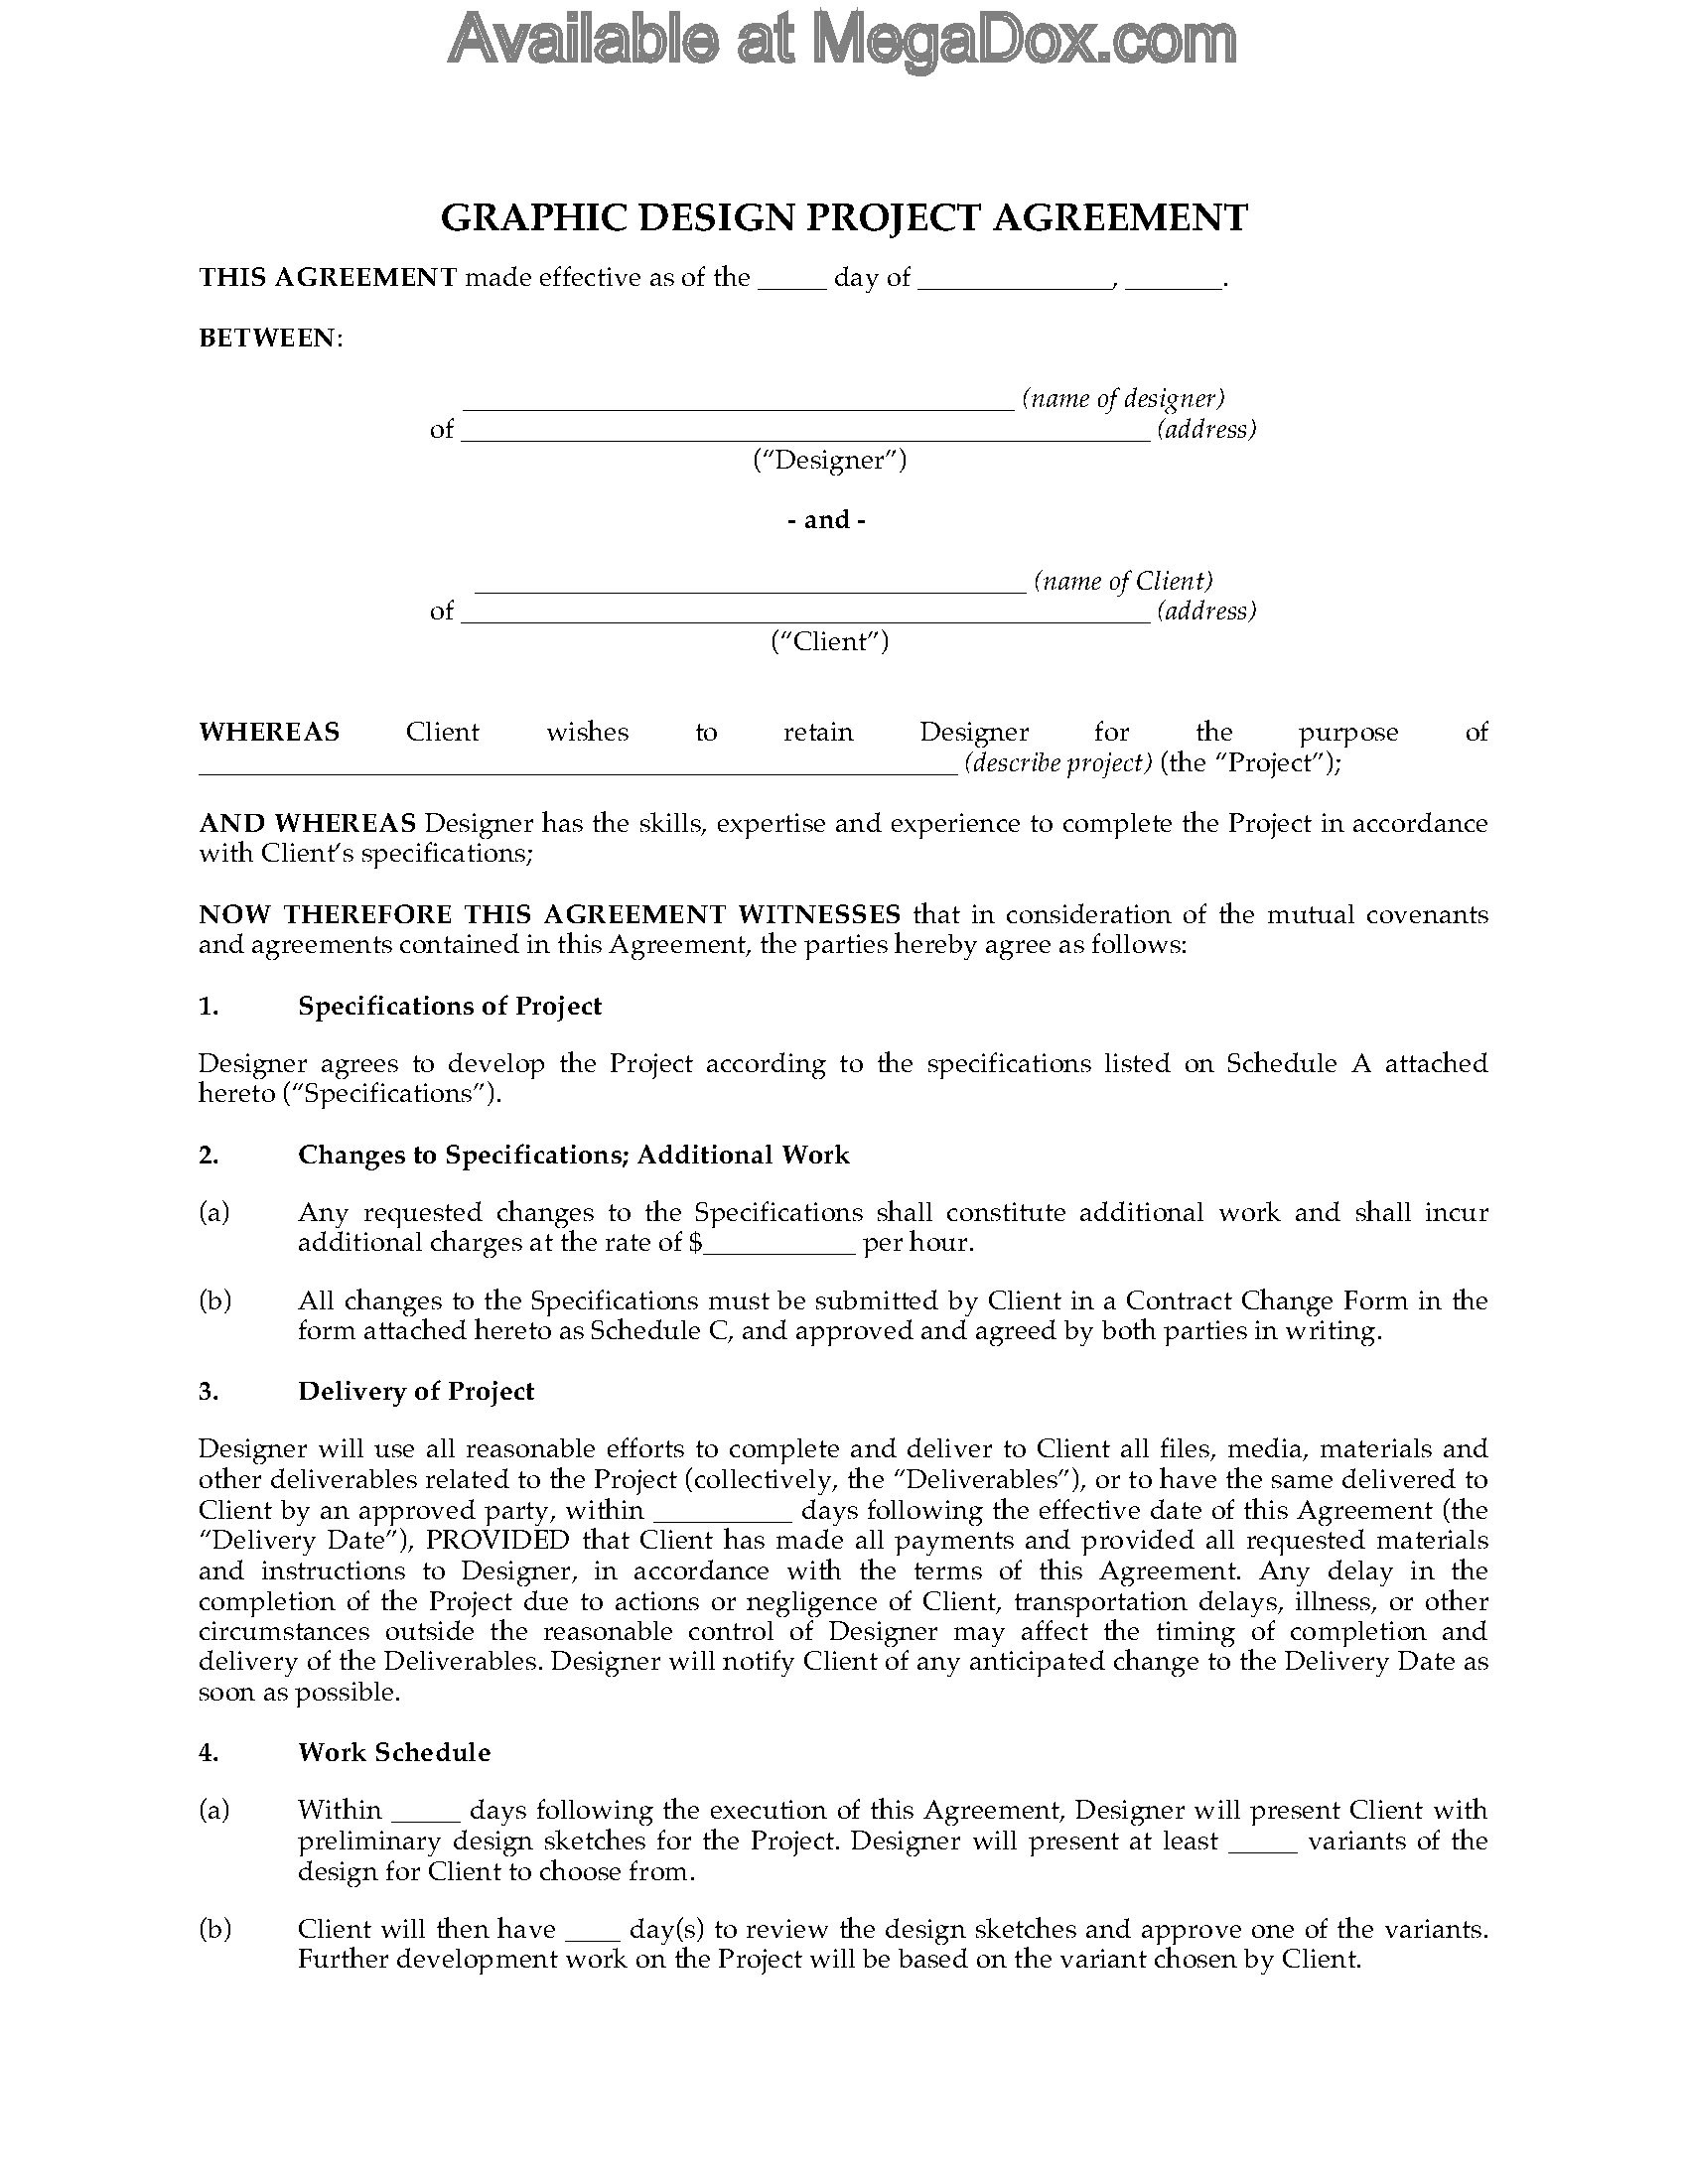 Graphic Design Project Agreement Legal Forms And Business Document